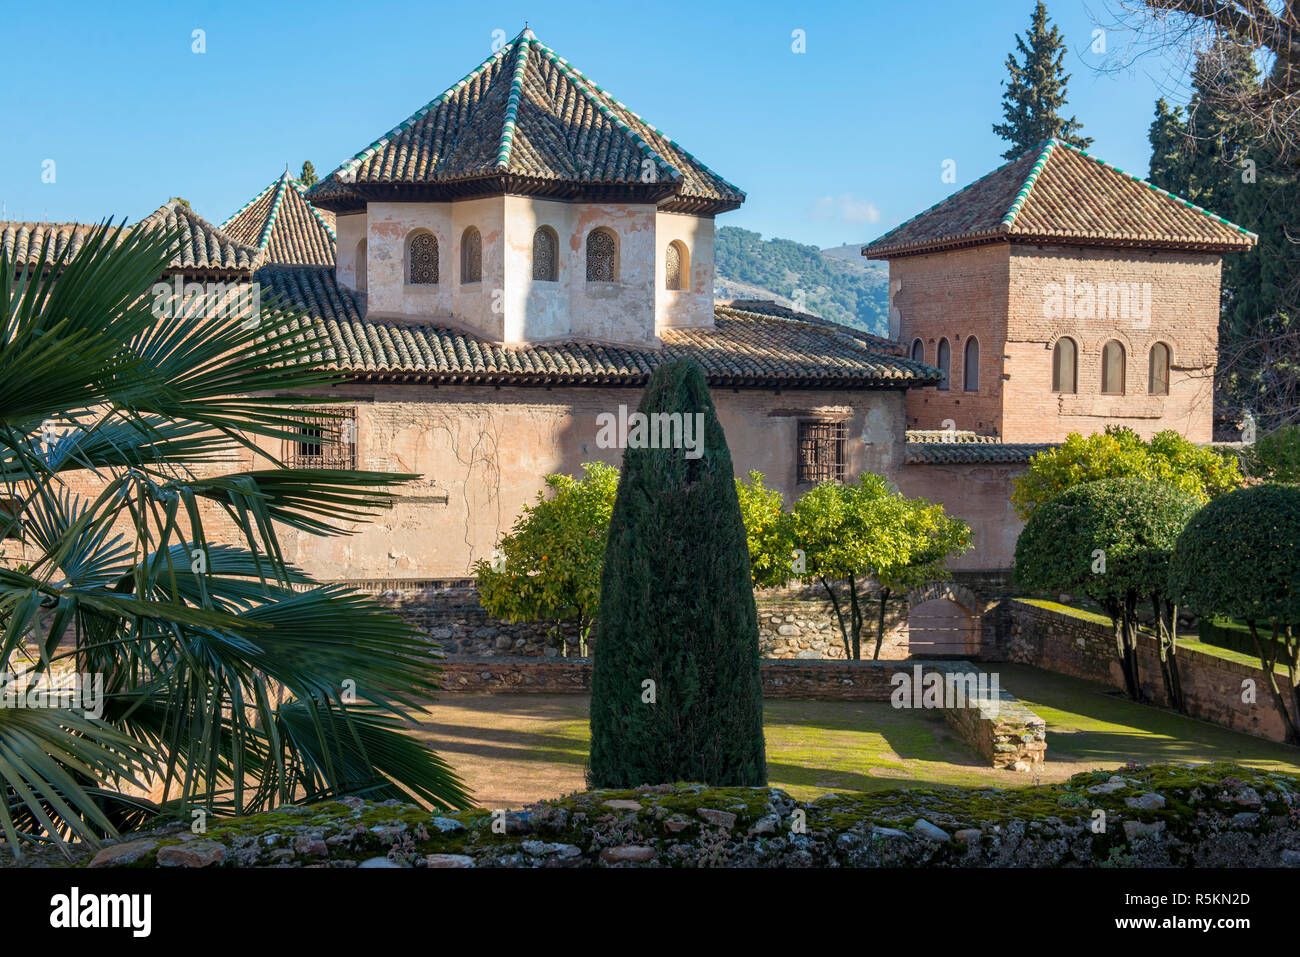 Tiled roofs of the towers of the Alhambra Palace in Granada, Spain and the gardens that surround them Stock Photo